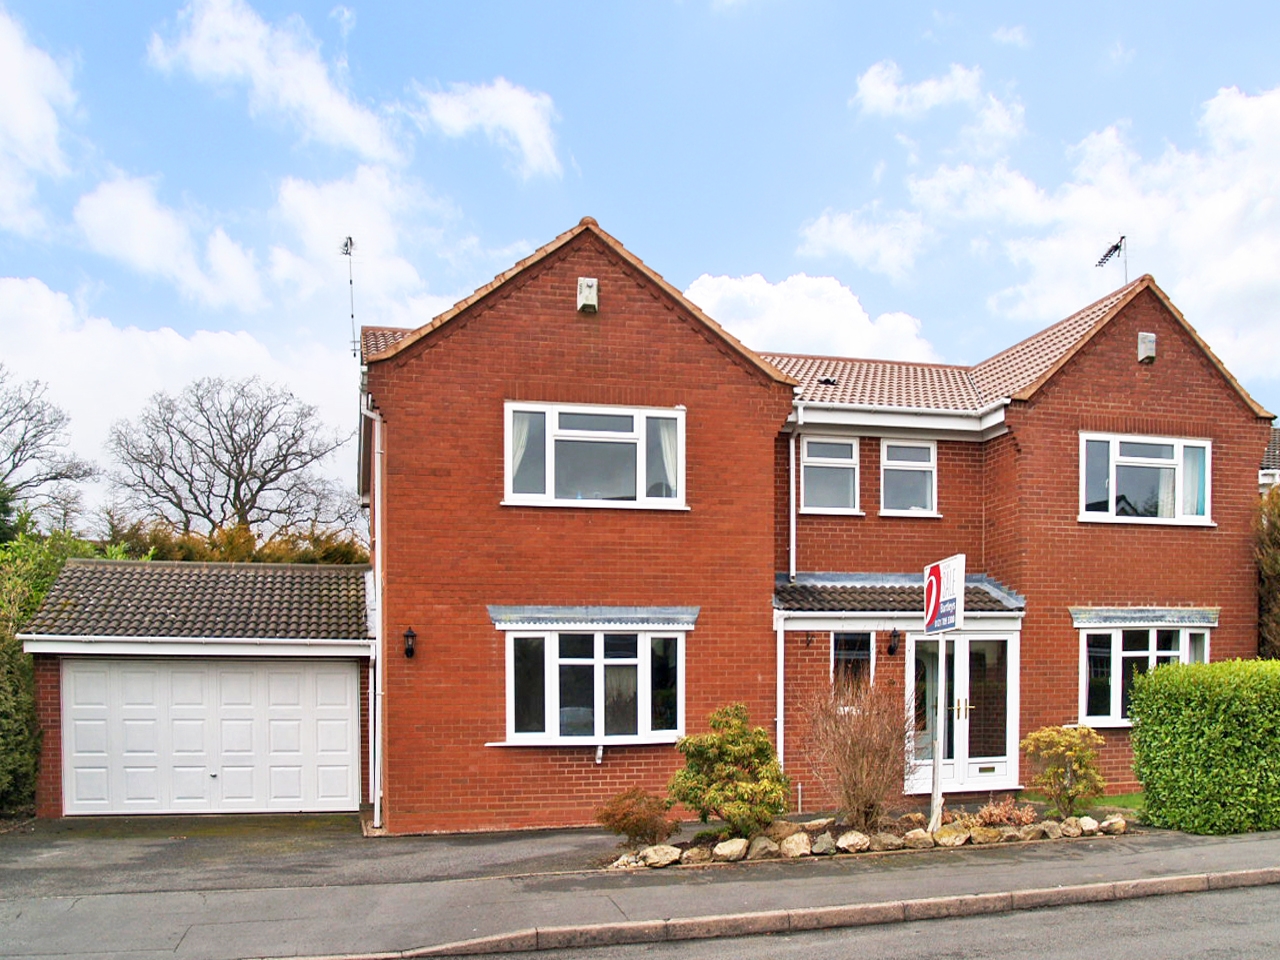 6 bedroom detached house SSTC in Solihull - Main Image.